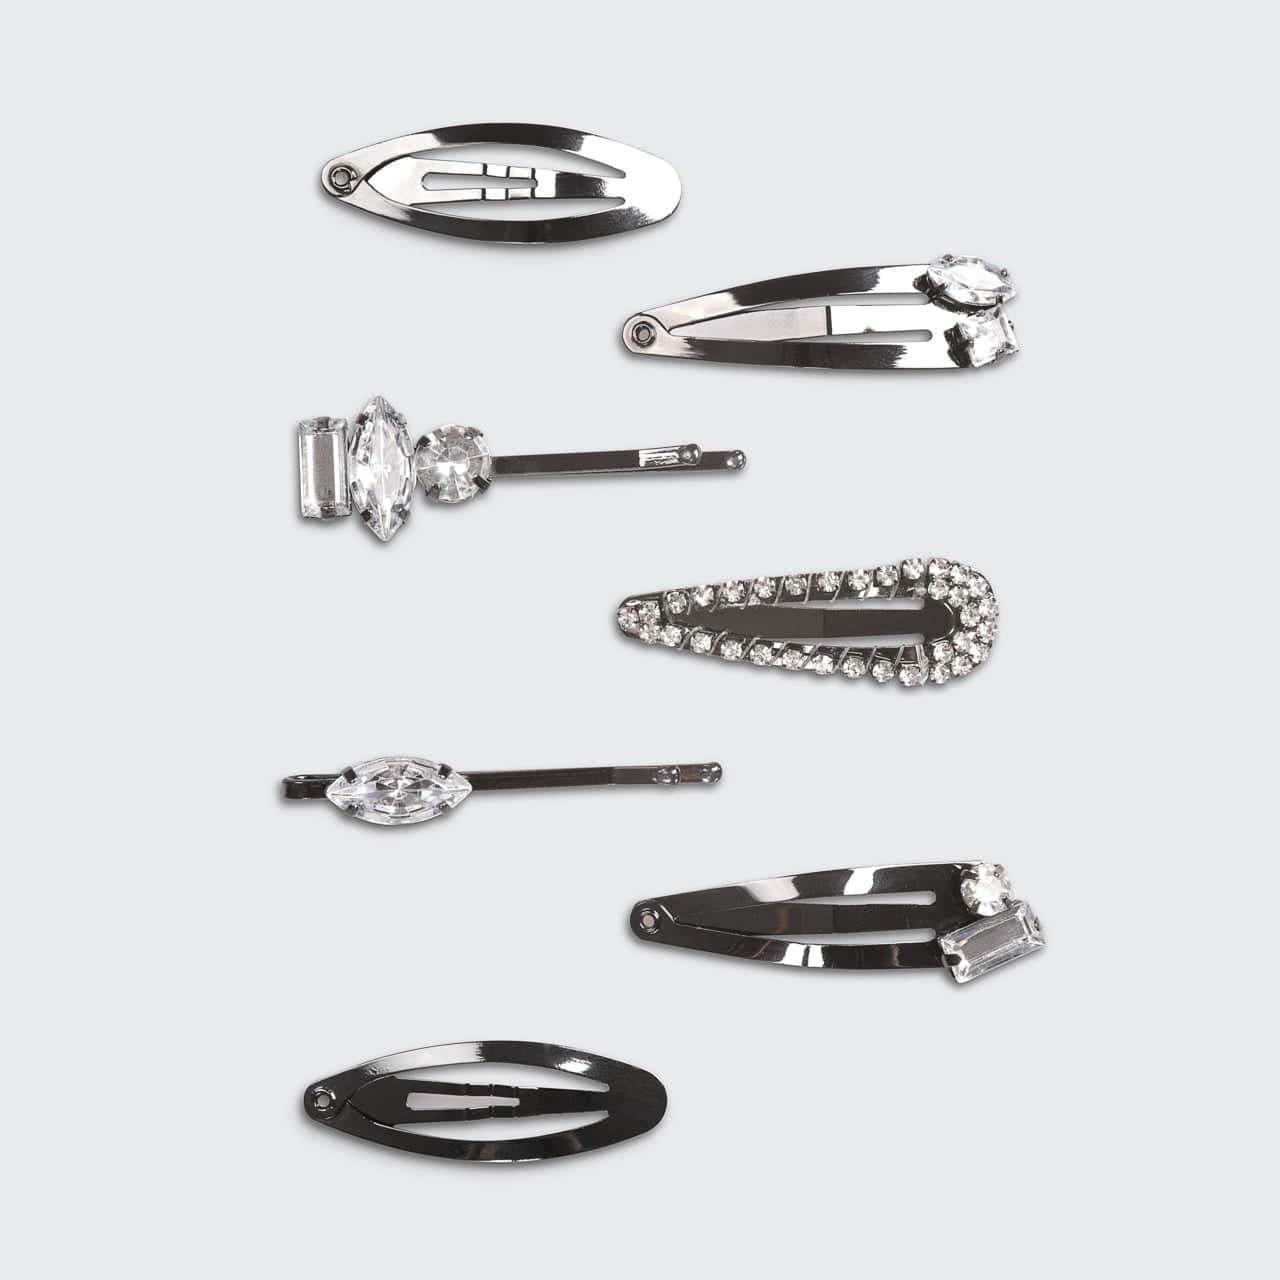 Micro Stackable Snap Clips 7pc set - Hematite